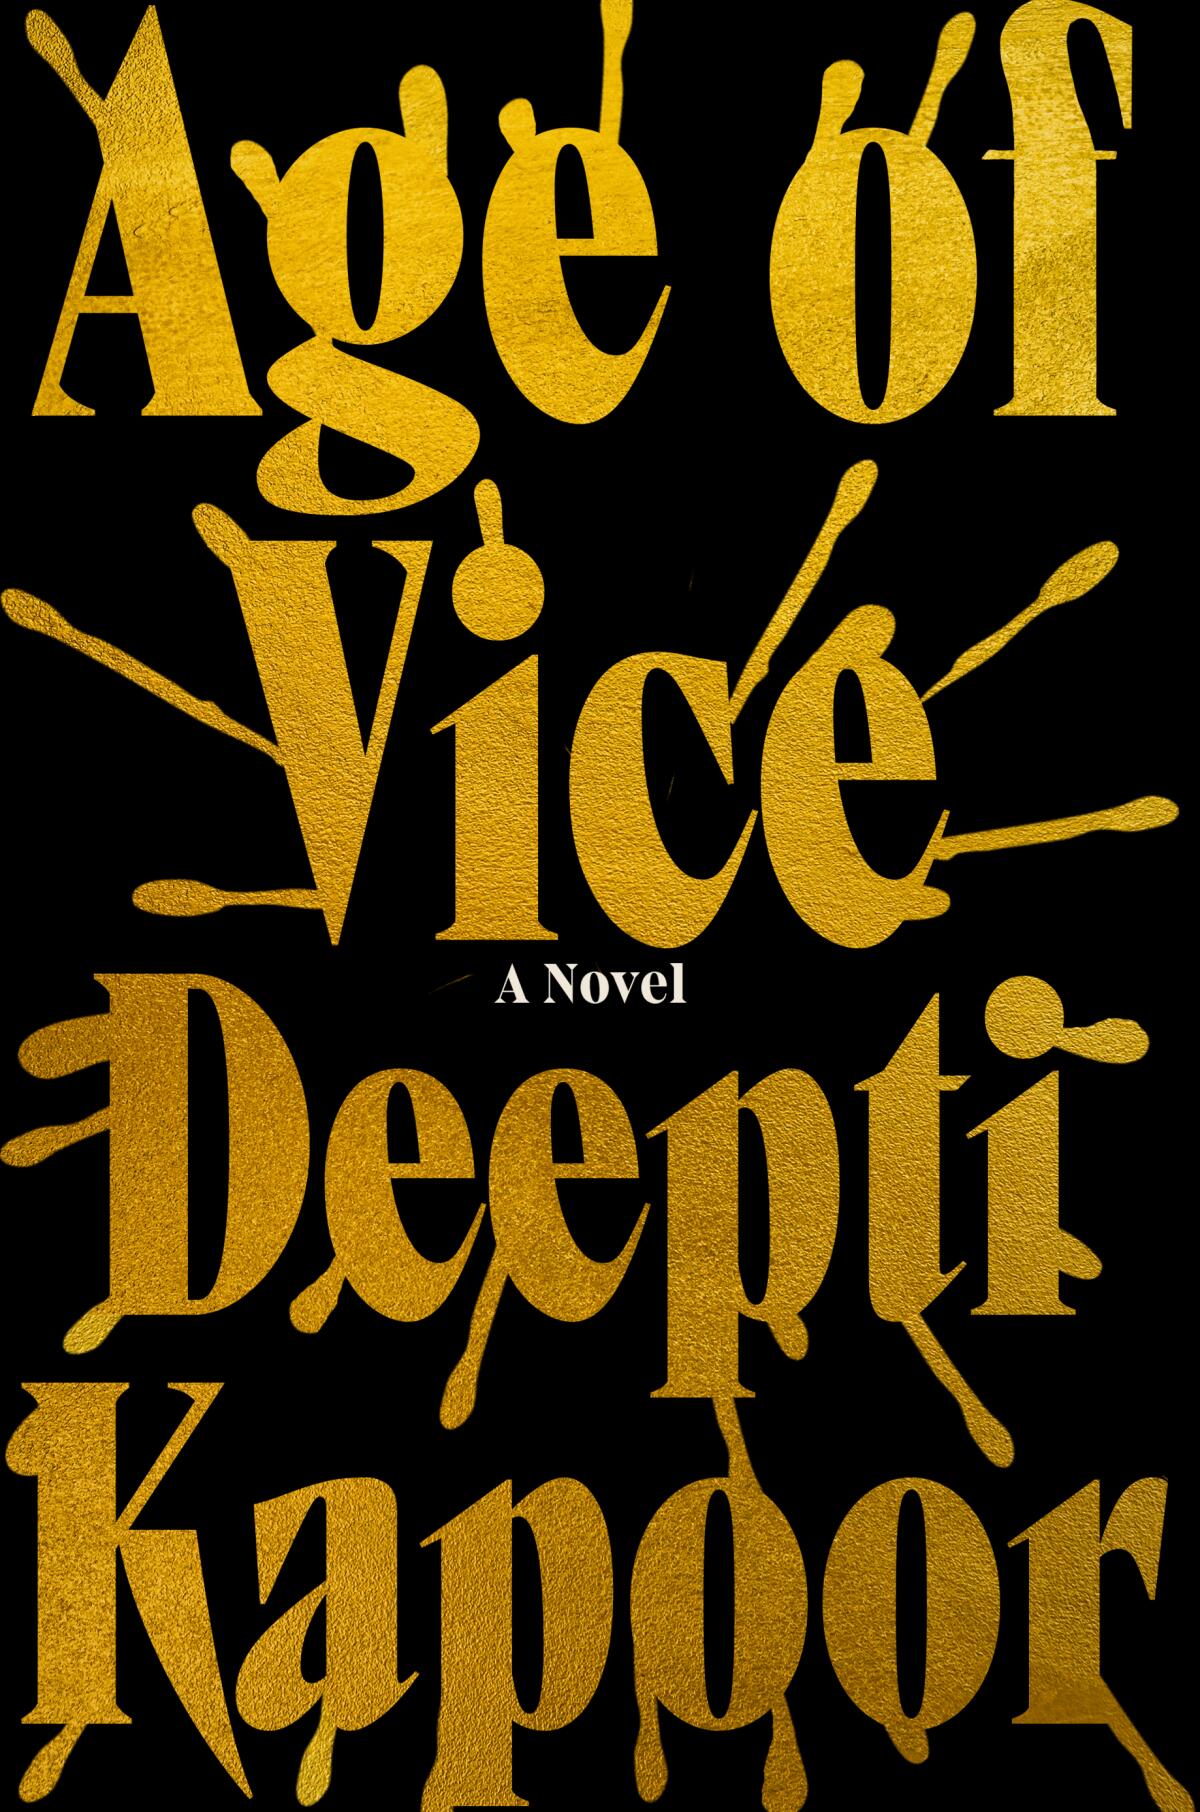 "Age of Vice," by Deepti Kapoor